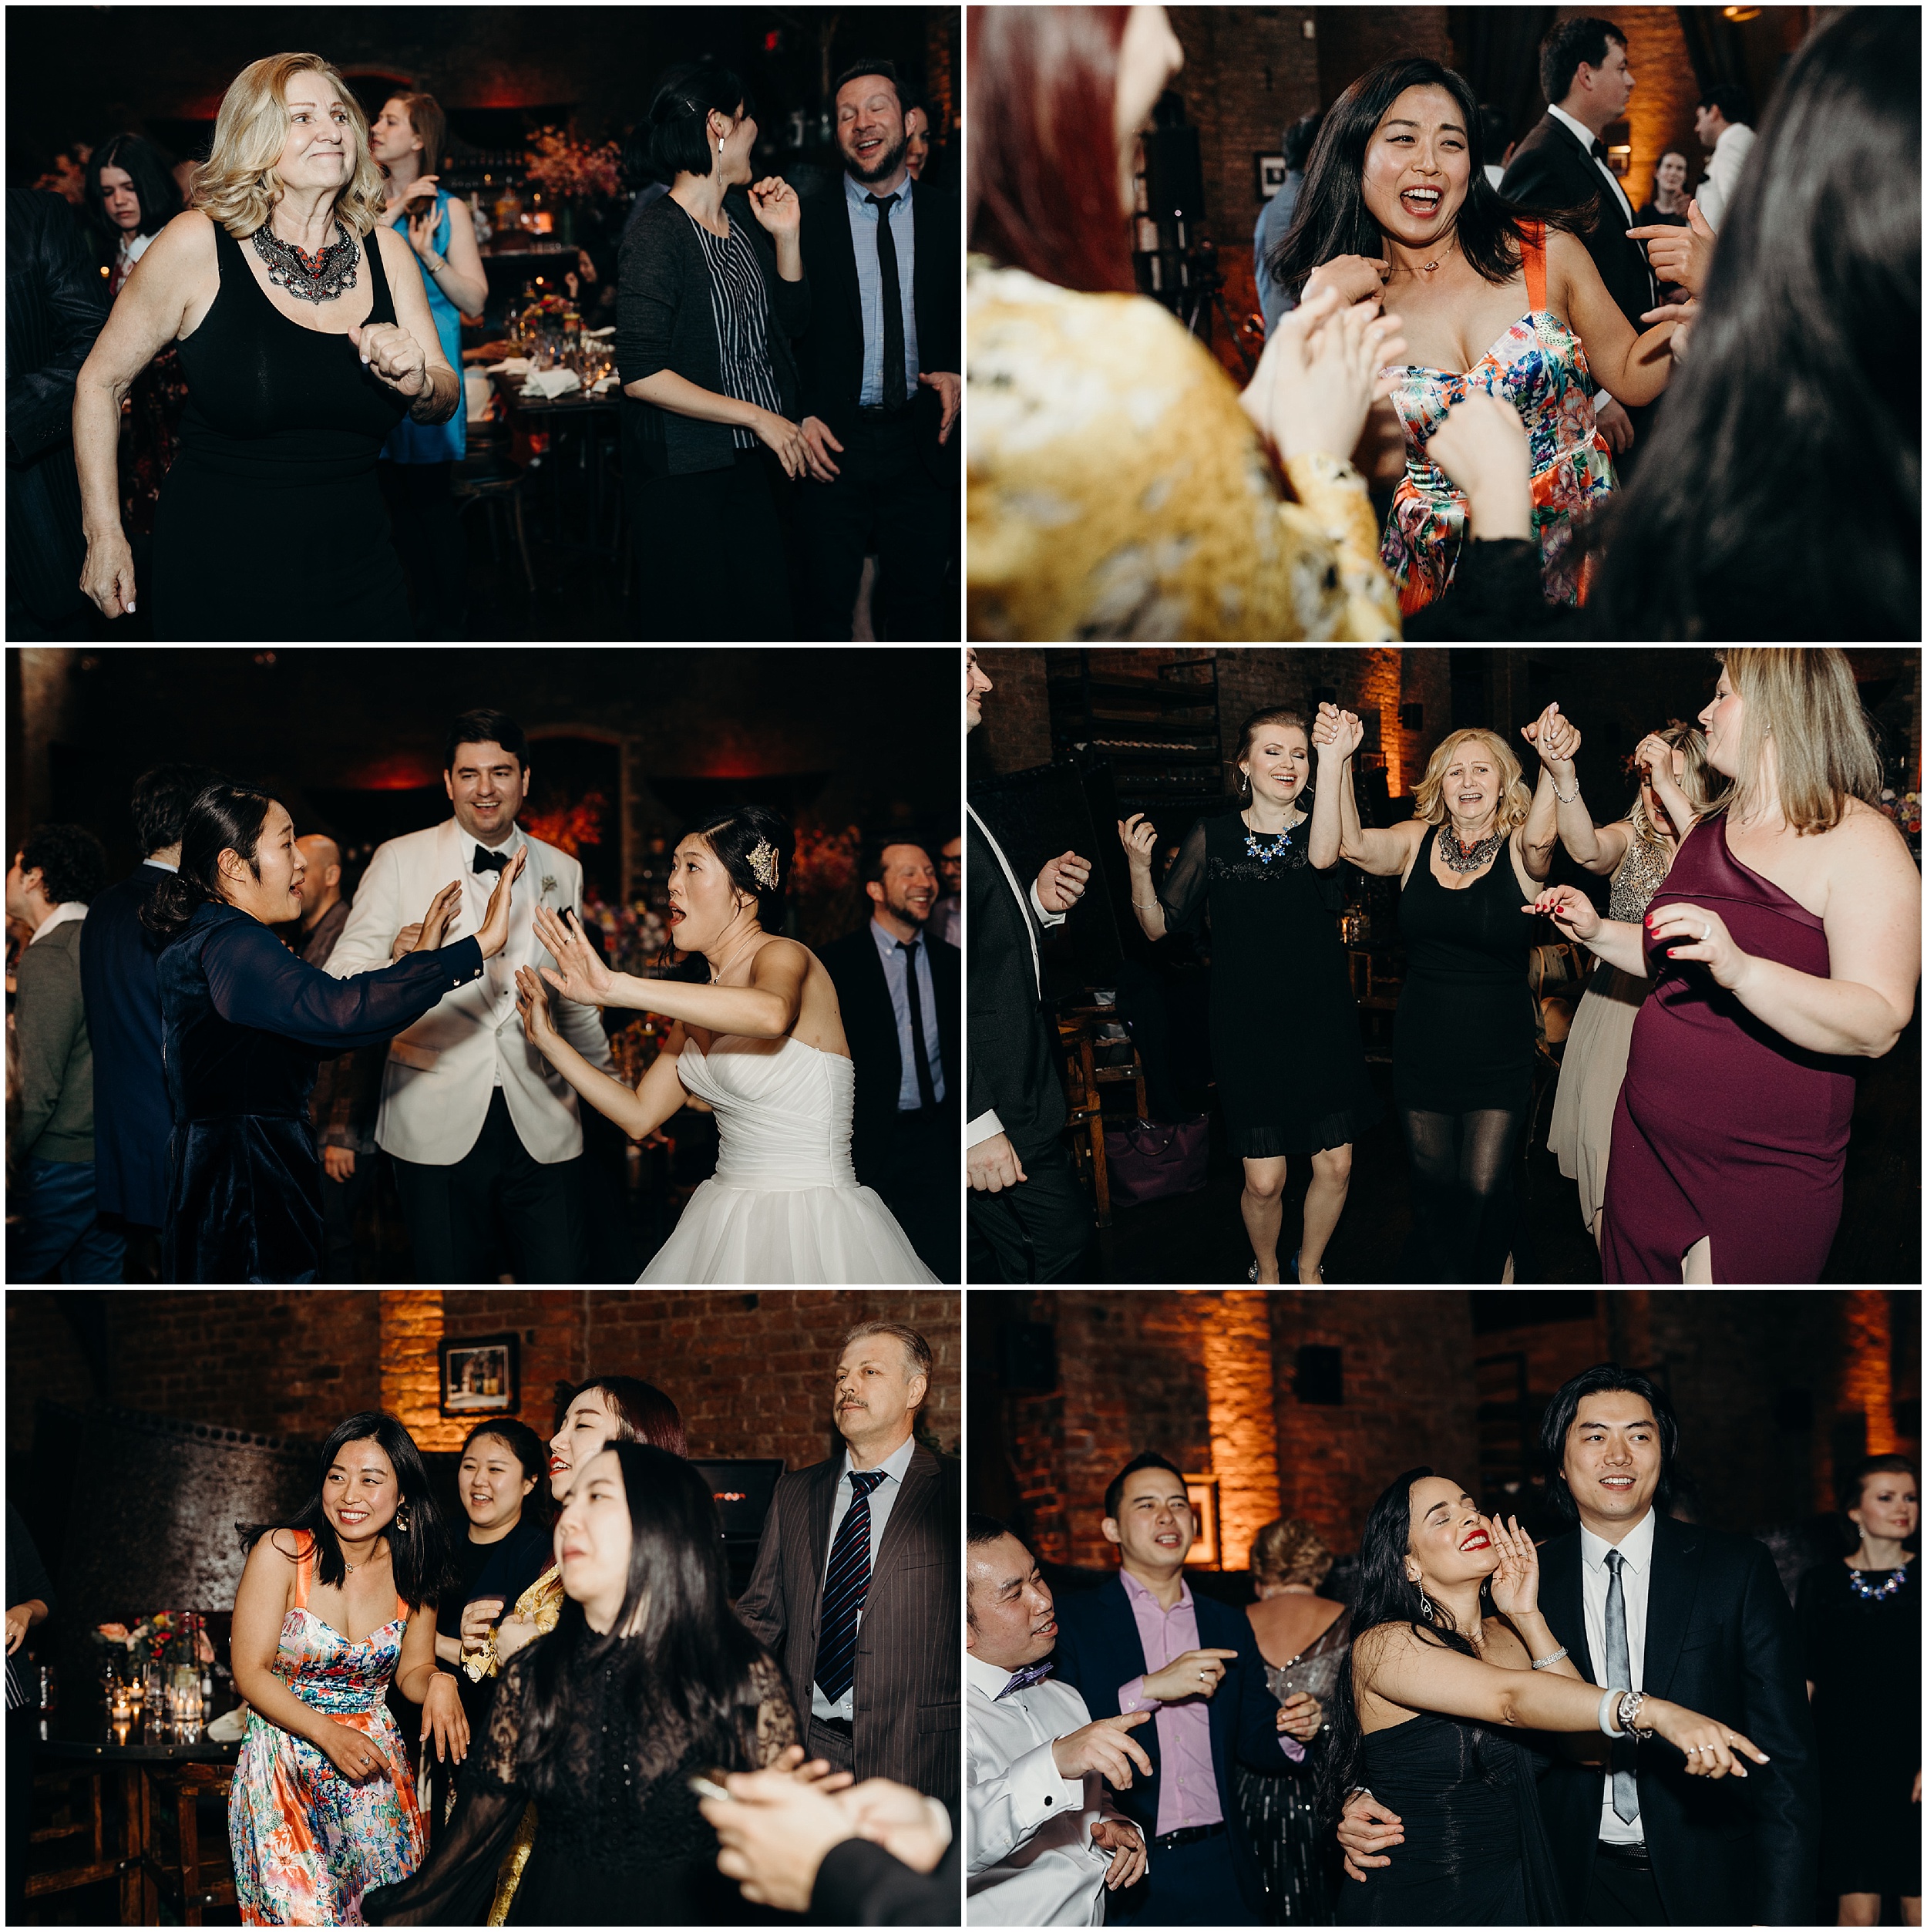 a collage of wedding guests dancing during the reception at mymoon in brooklyn, new york